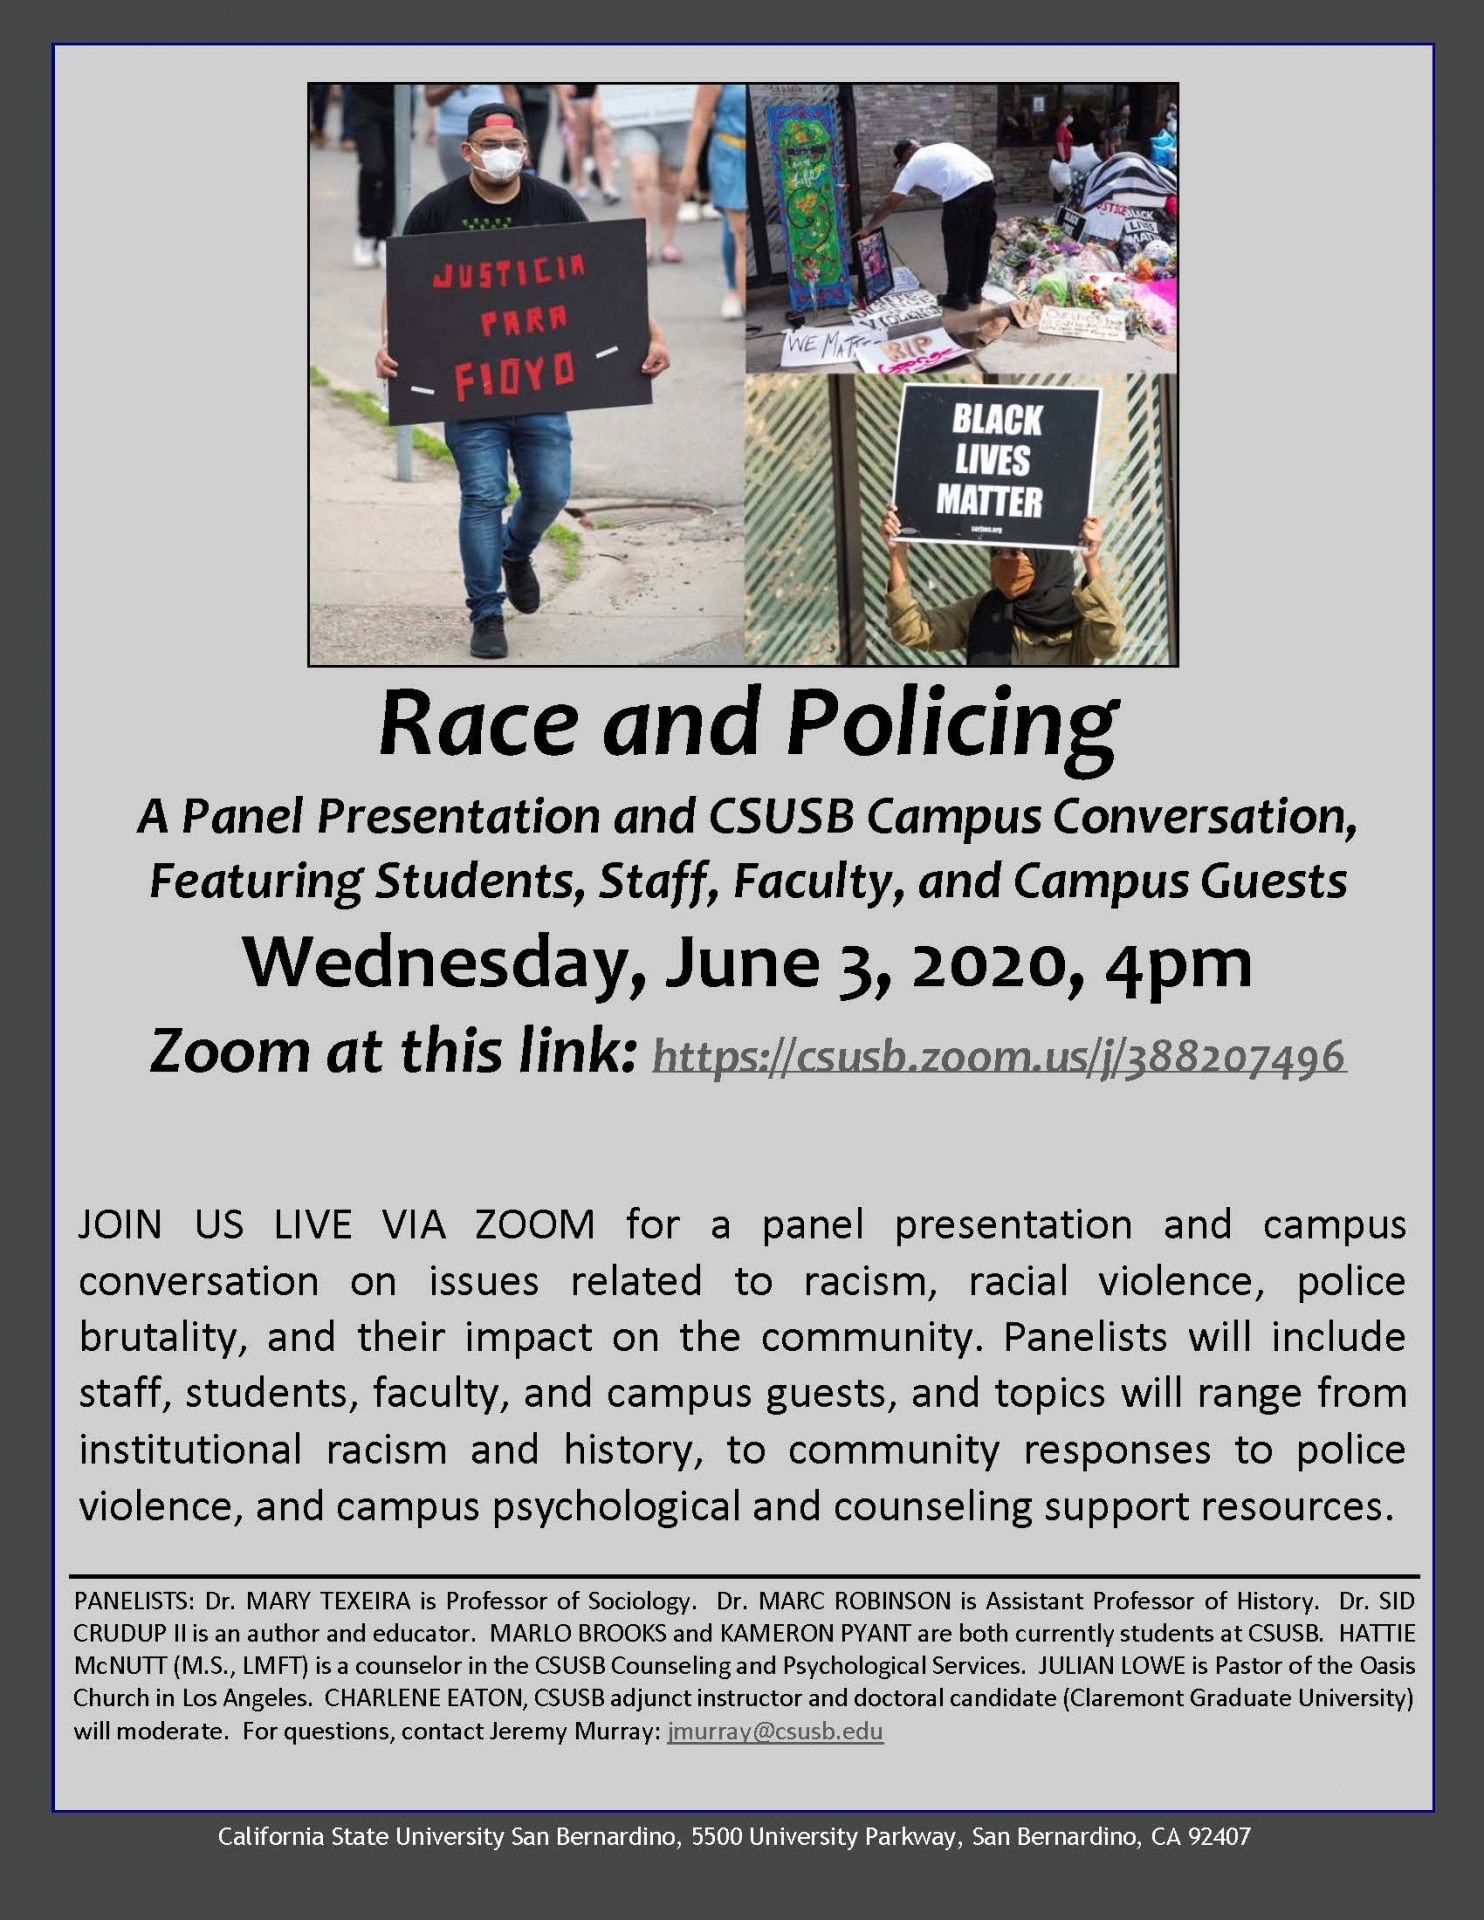 Race and Policing flier, updated